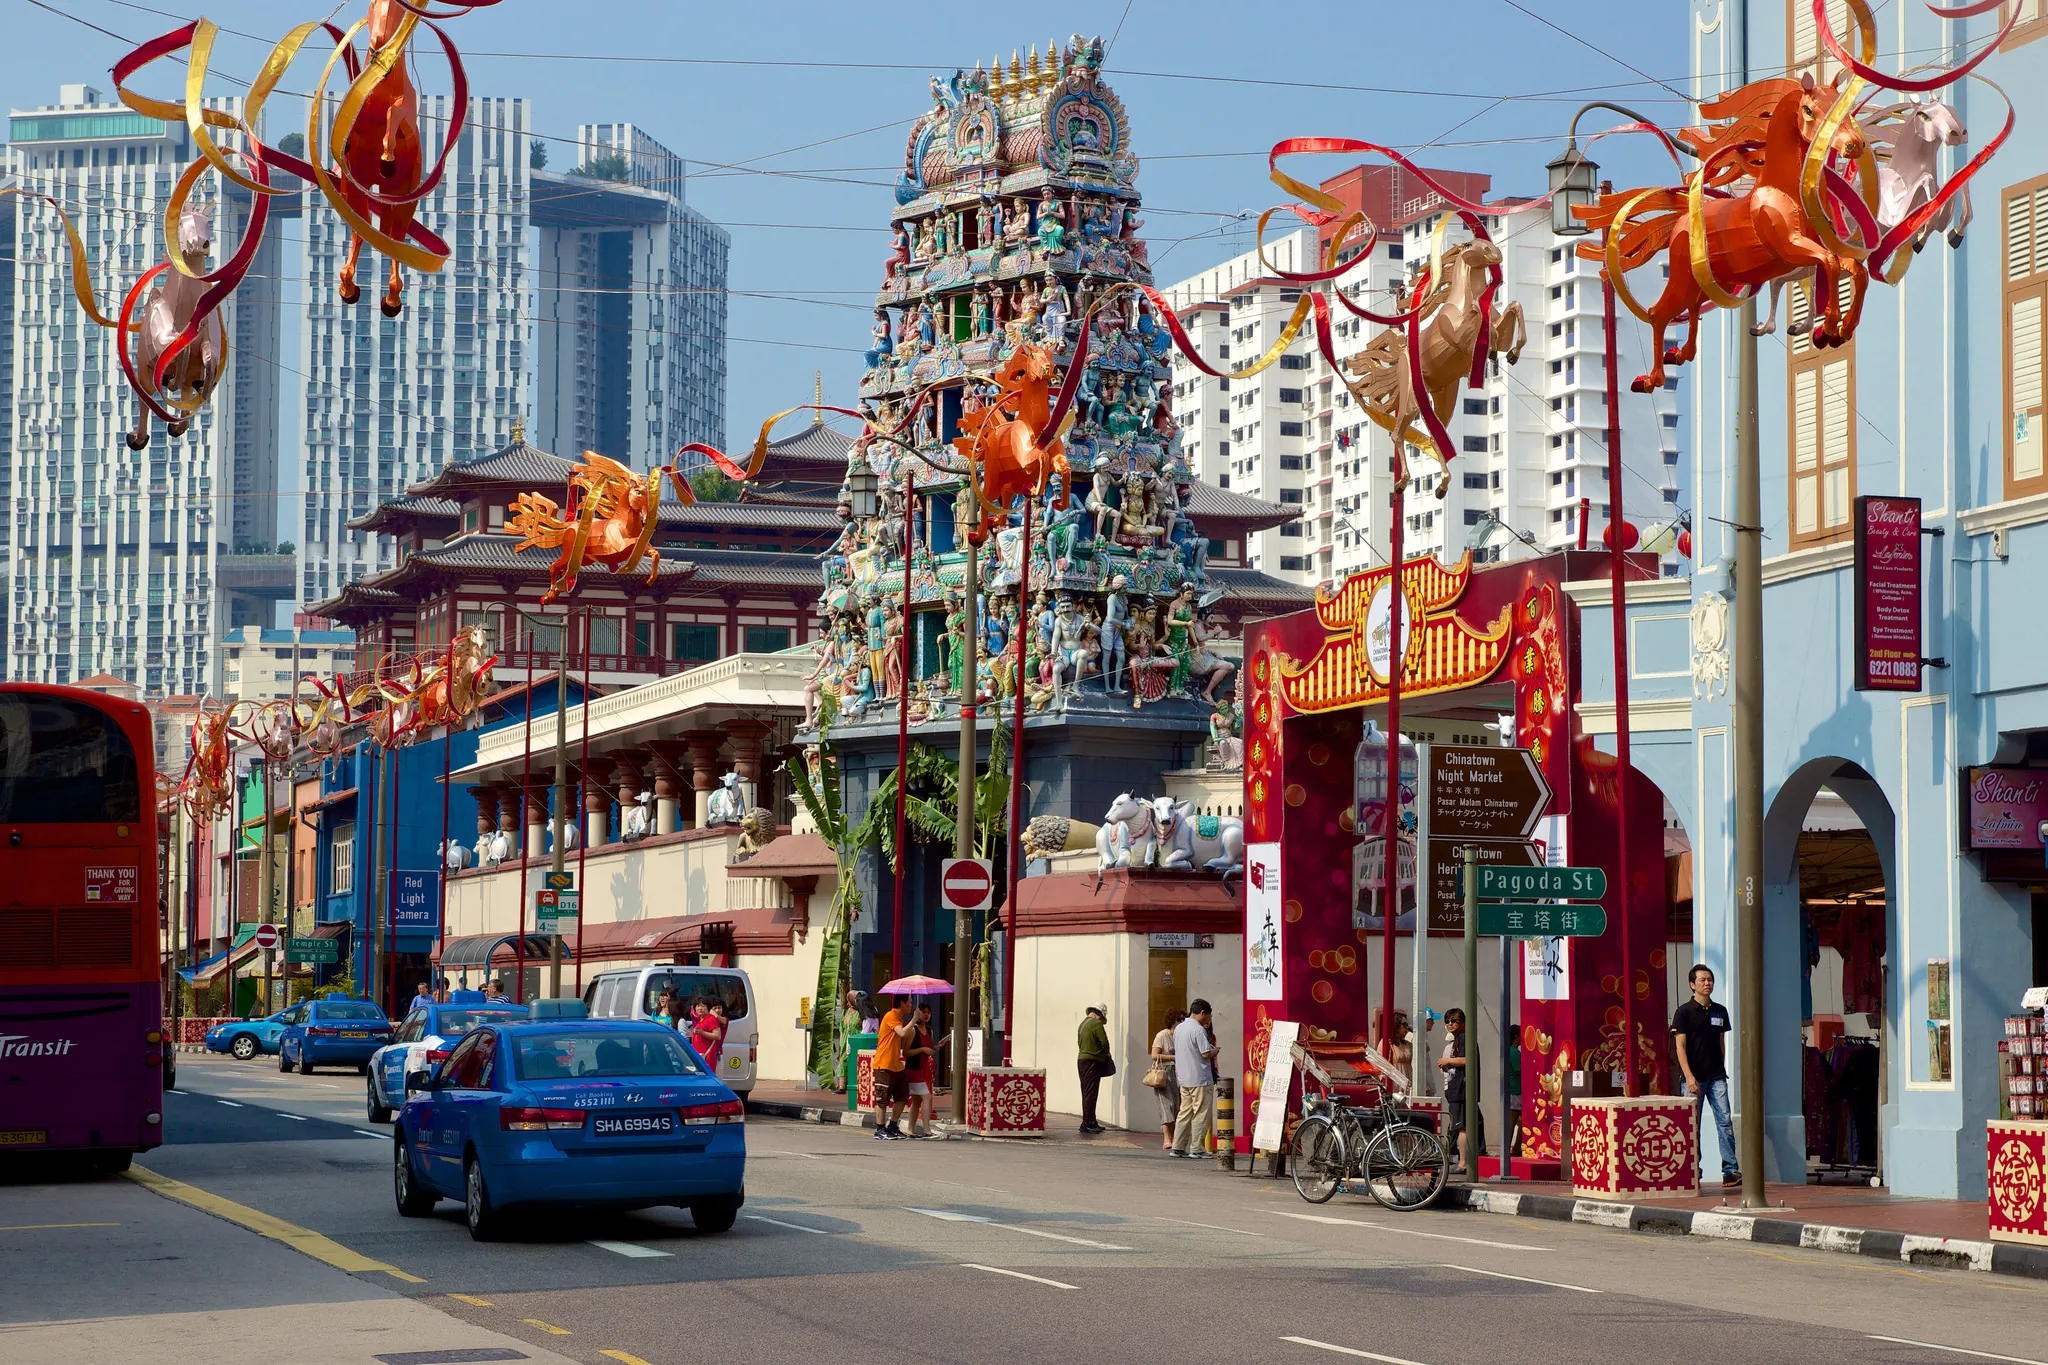 Chinatown Street Market in Singapore, central_asia | Souvenirs,Spices,Organic Food,Groceries,Other Crafts,Fruit & Vegetable,Herbs,Meat - Country Helper